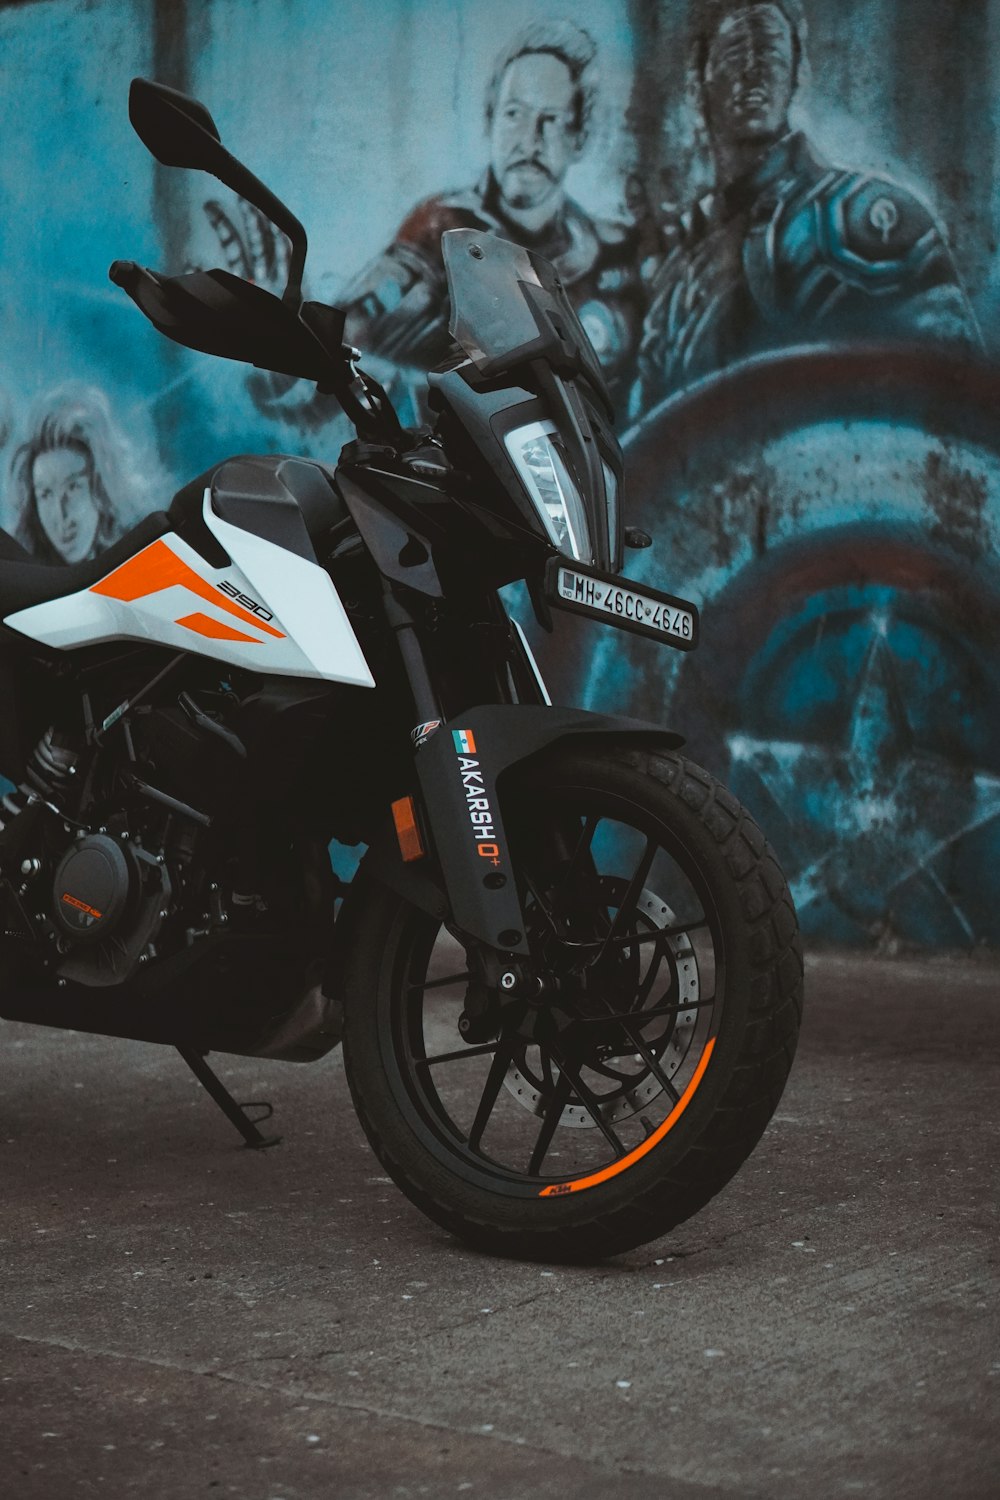 a motorcycle parked in front of a wall with graffiti